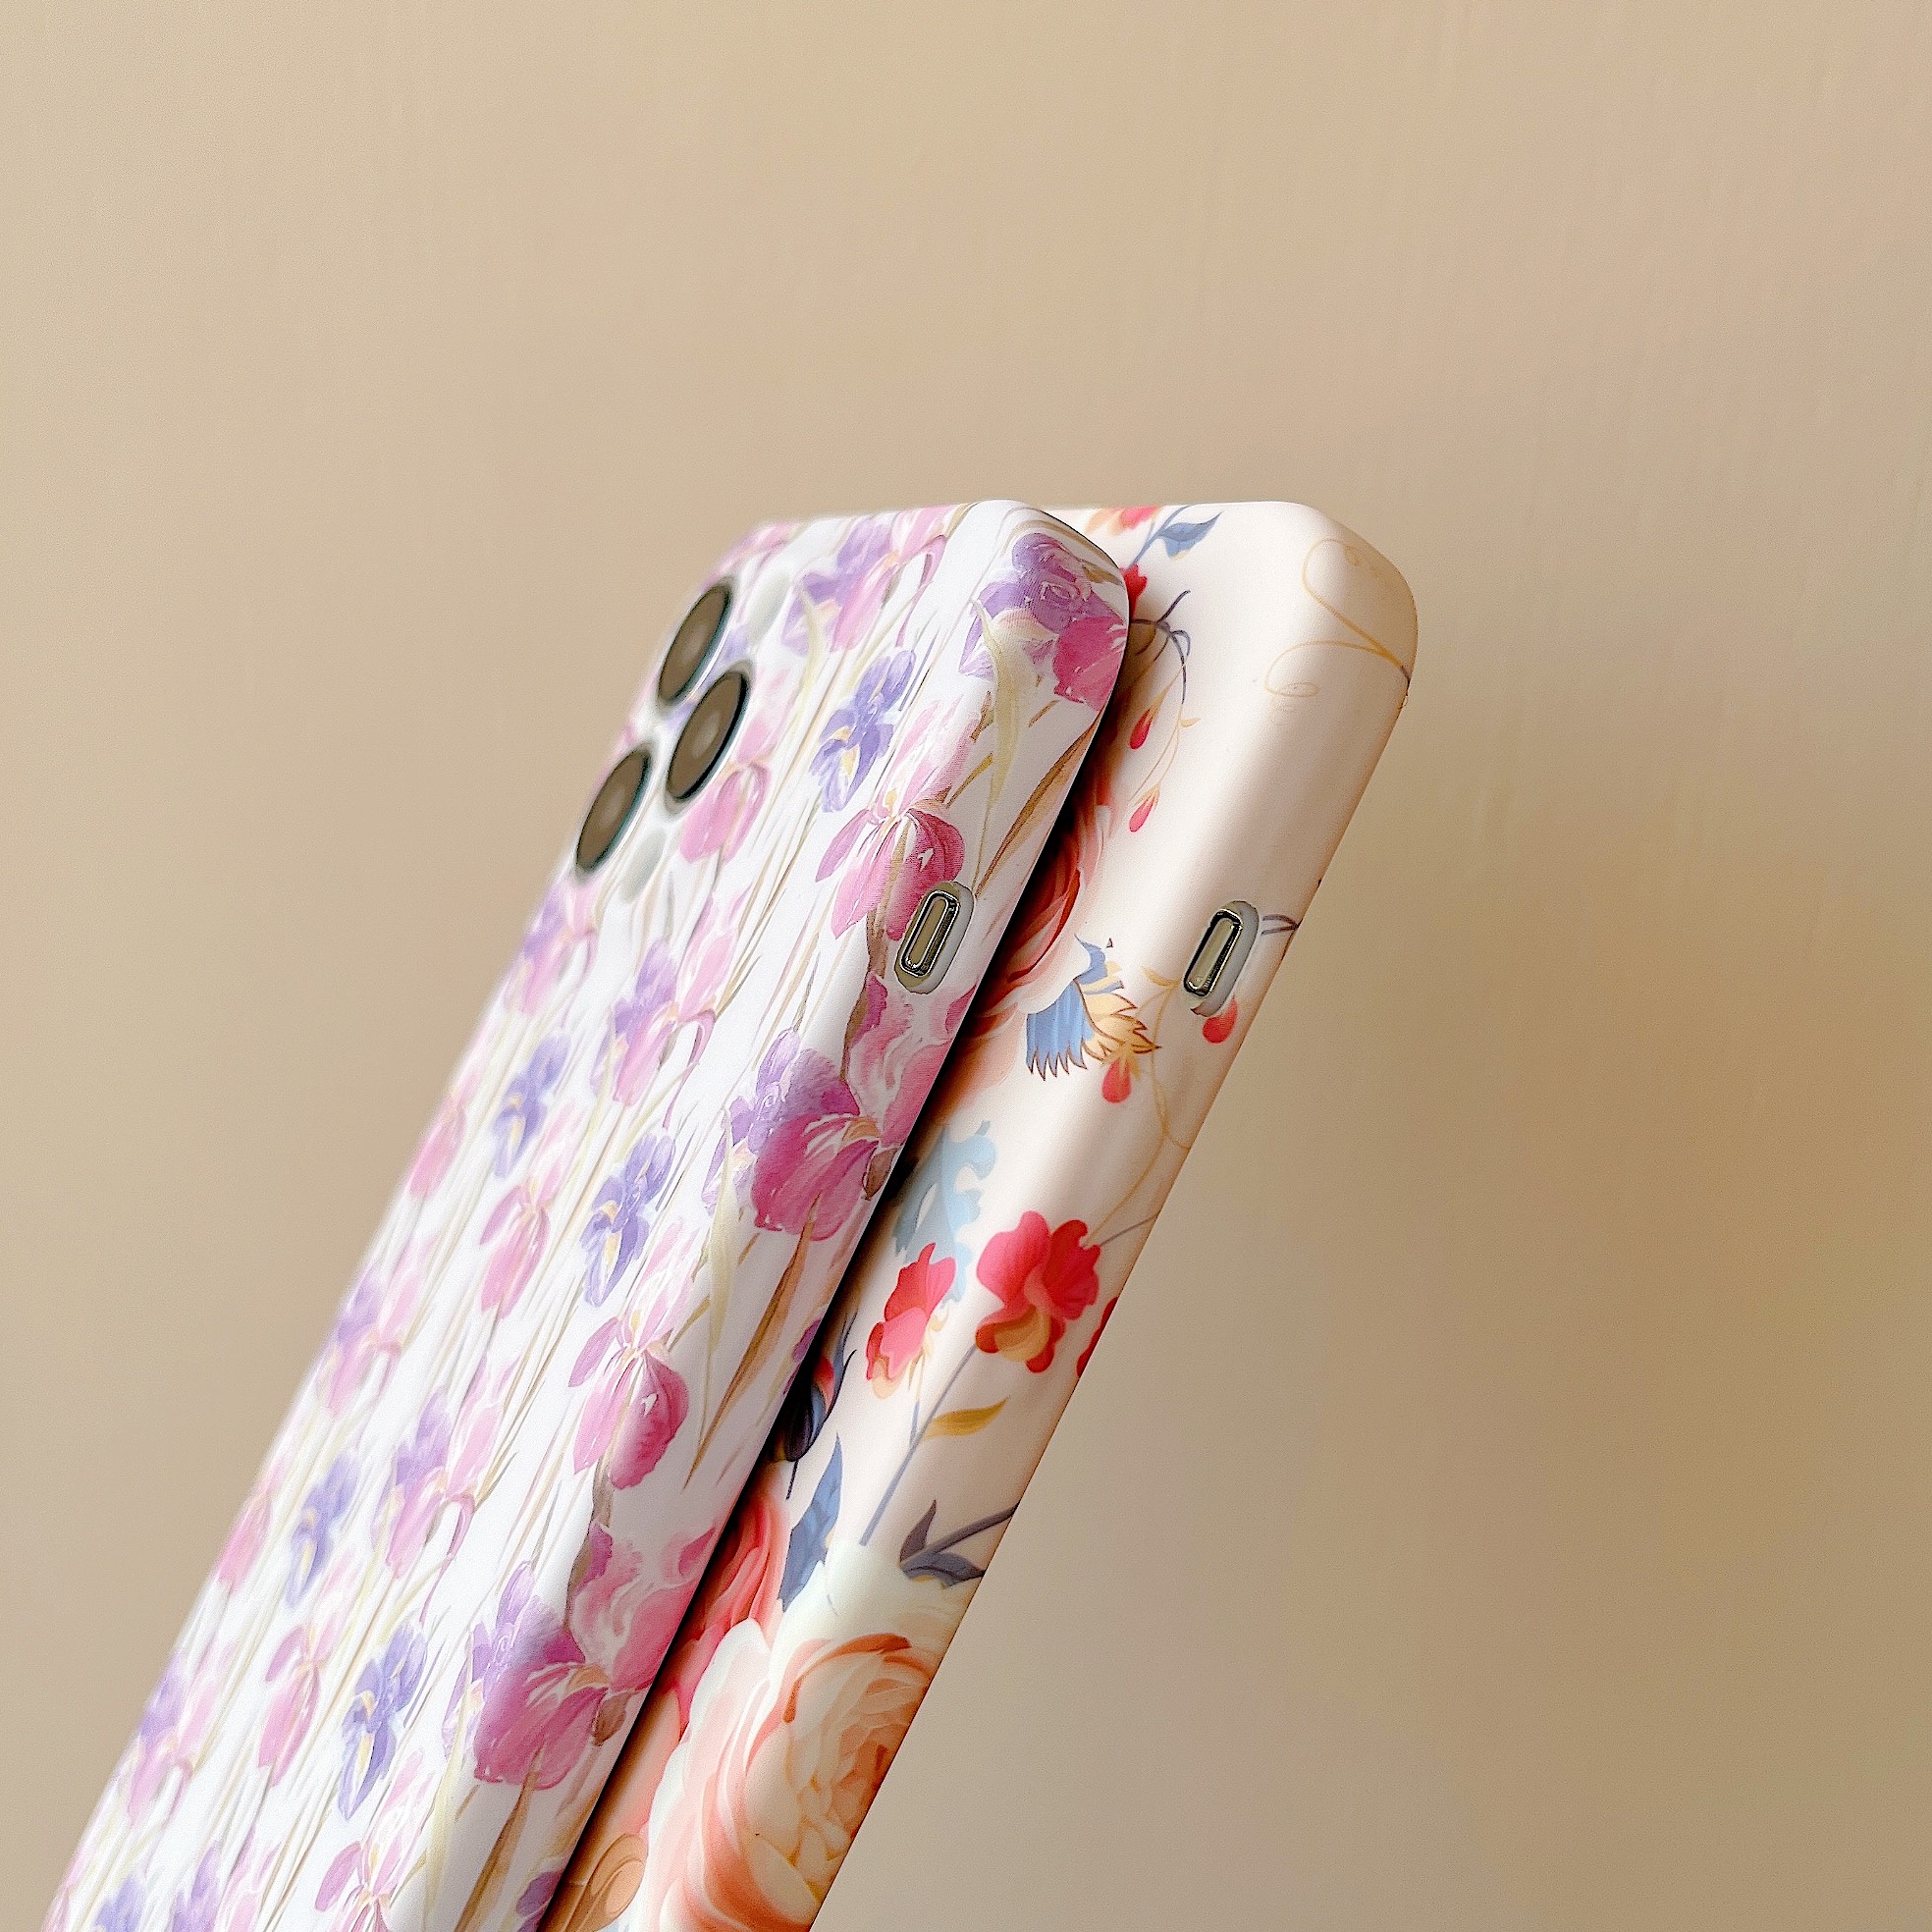 Fashion Flower IMD TPU Soft Phone Cases For iPhone 15 14 Plus 13 12 Pro Max 11 XR XS X 8 7 Luxury Floral Stylish Rose Girls Lady Women Pretty Smart Cell Phone Back Cover Skin